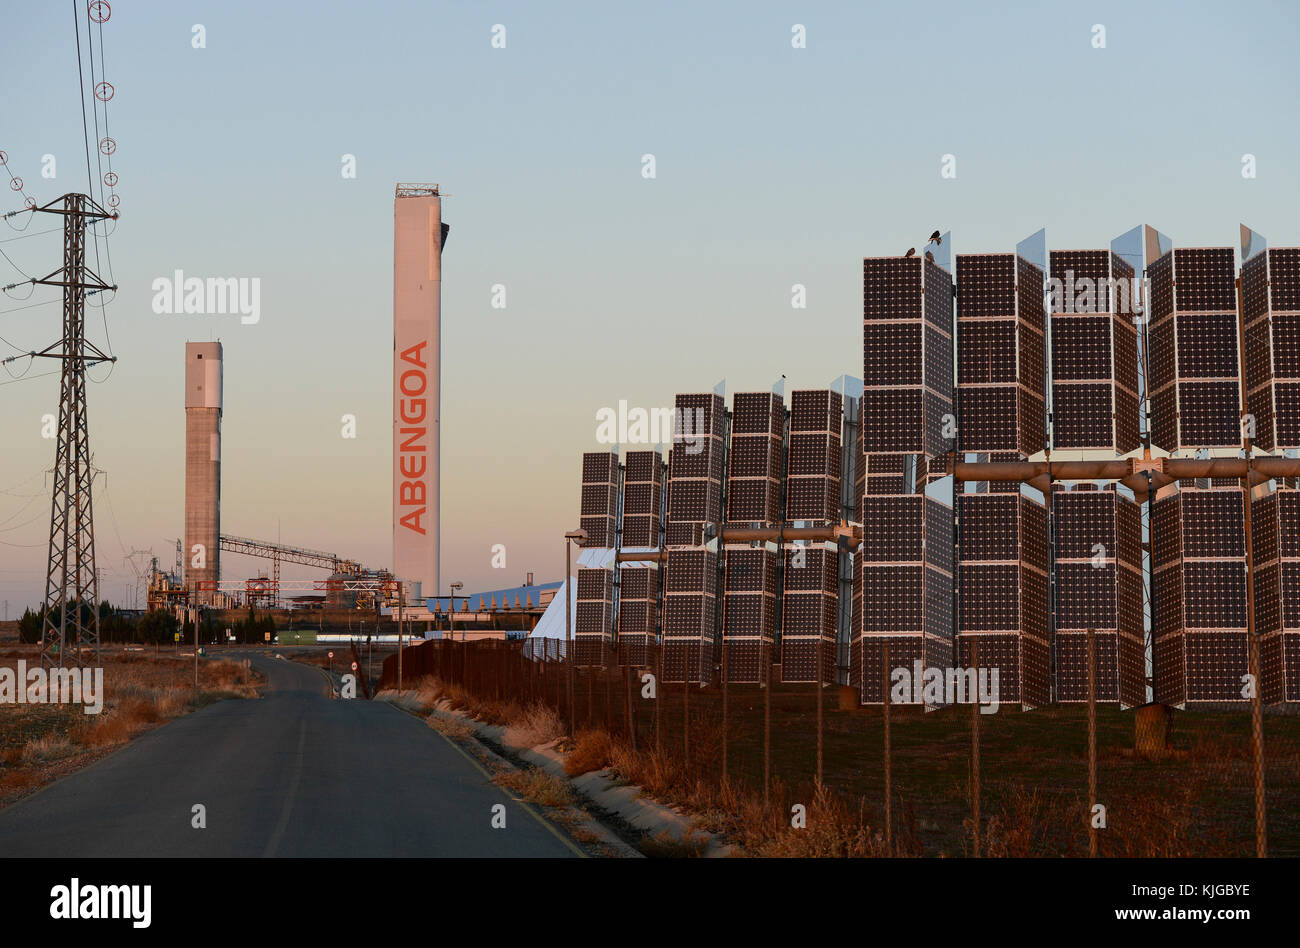 Spain, Seville, Sanlucar la Mayor, Solnova solar power station with flat heliostats and tower PS10 and PS20 by company Abengoa Stock Photo